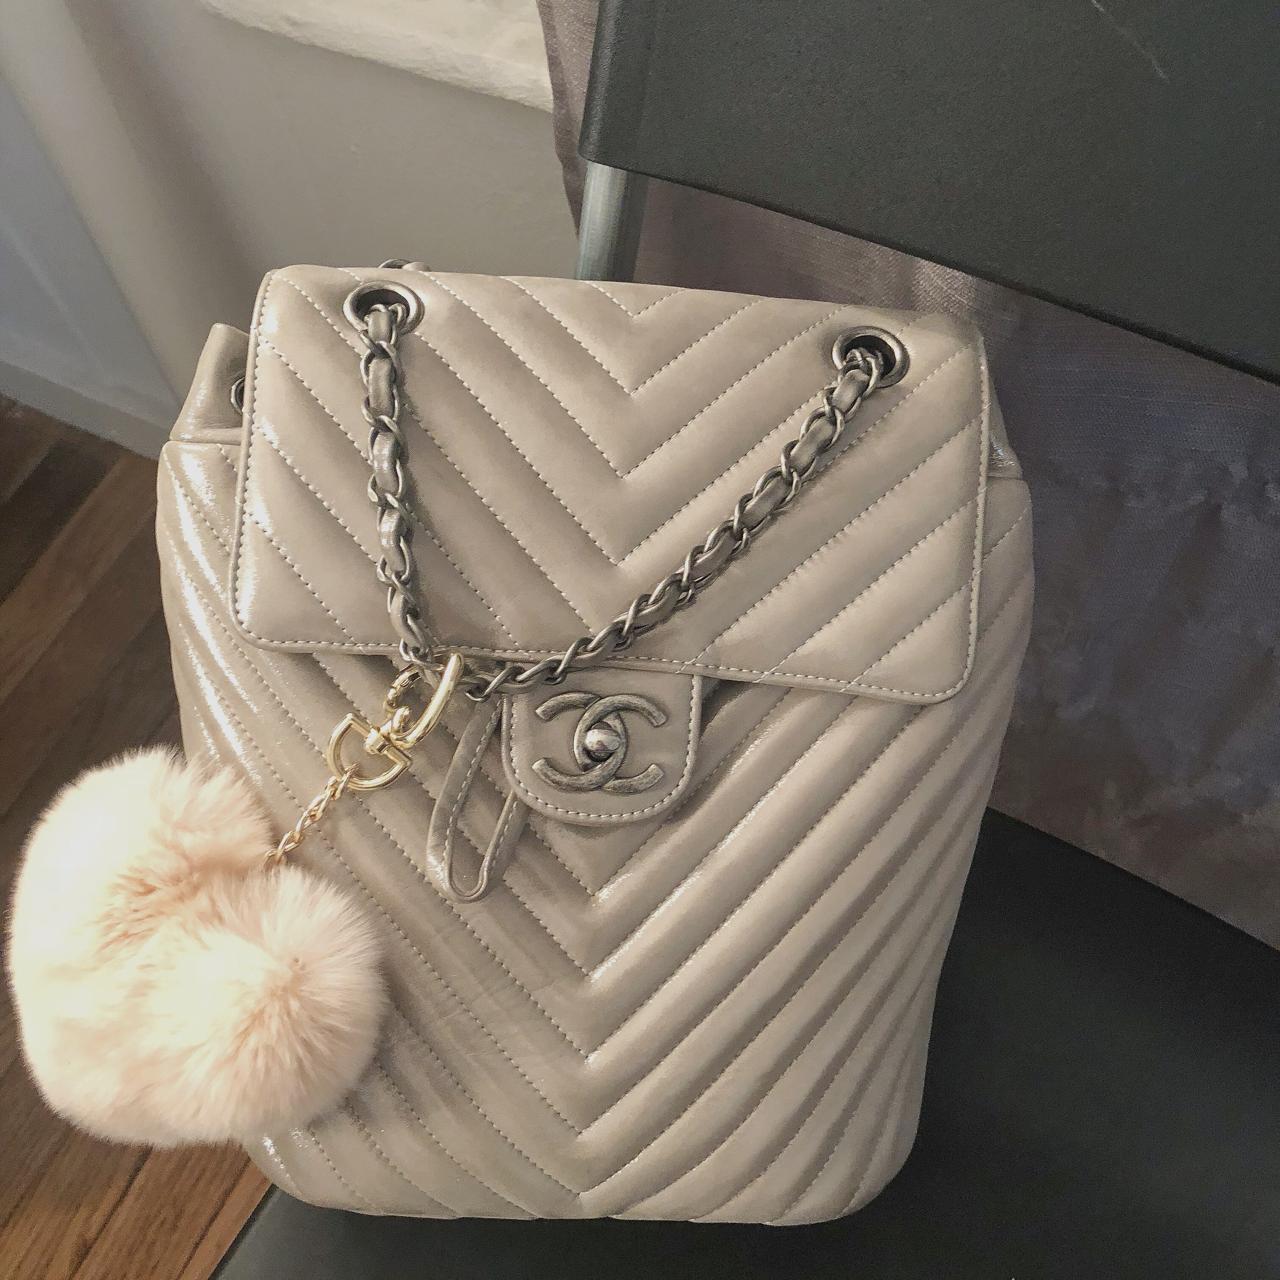 Authentic Chanel urban spirit backpack in size